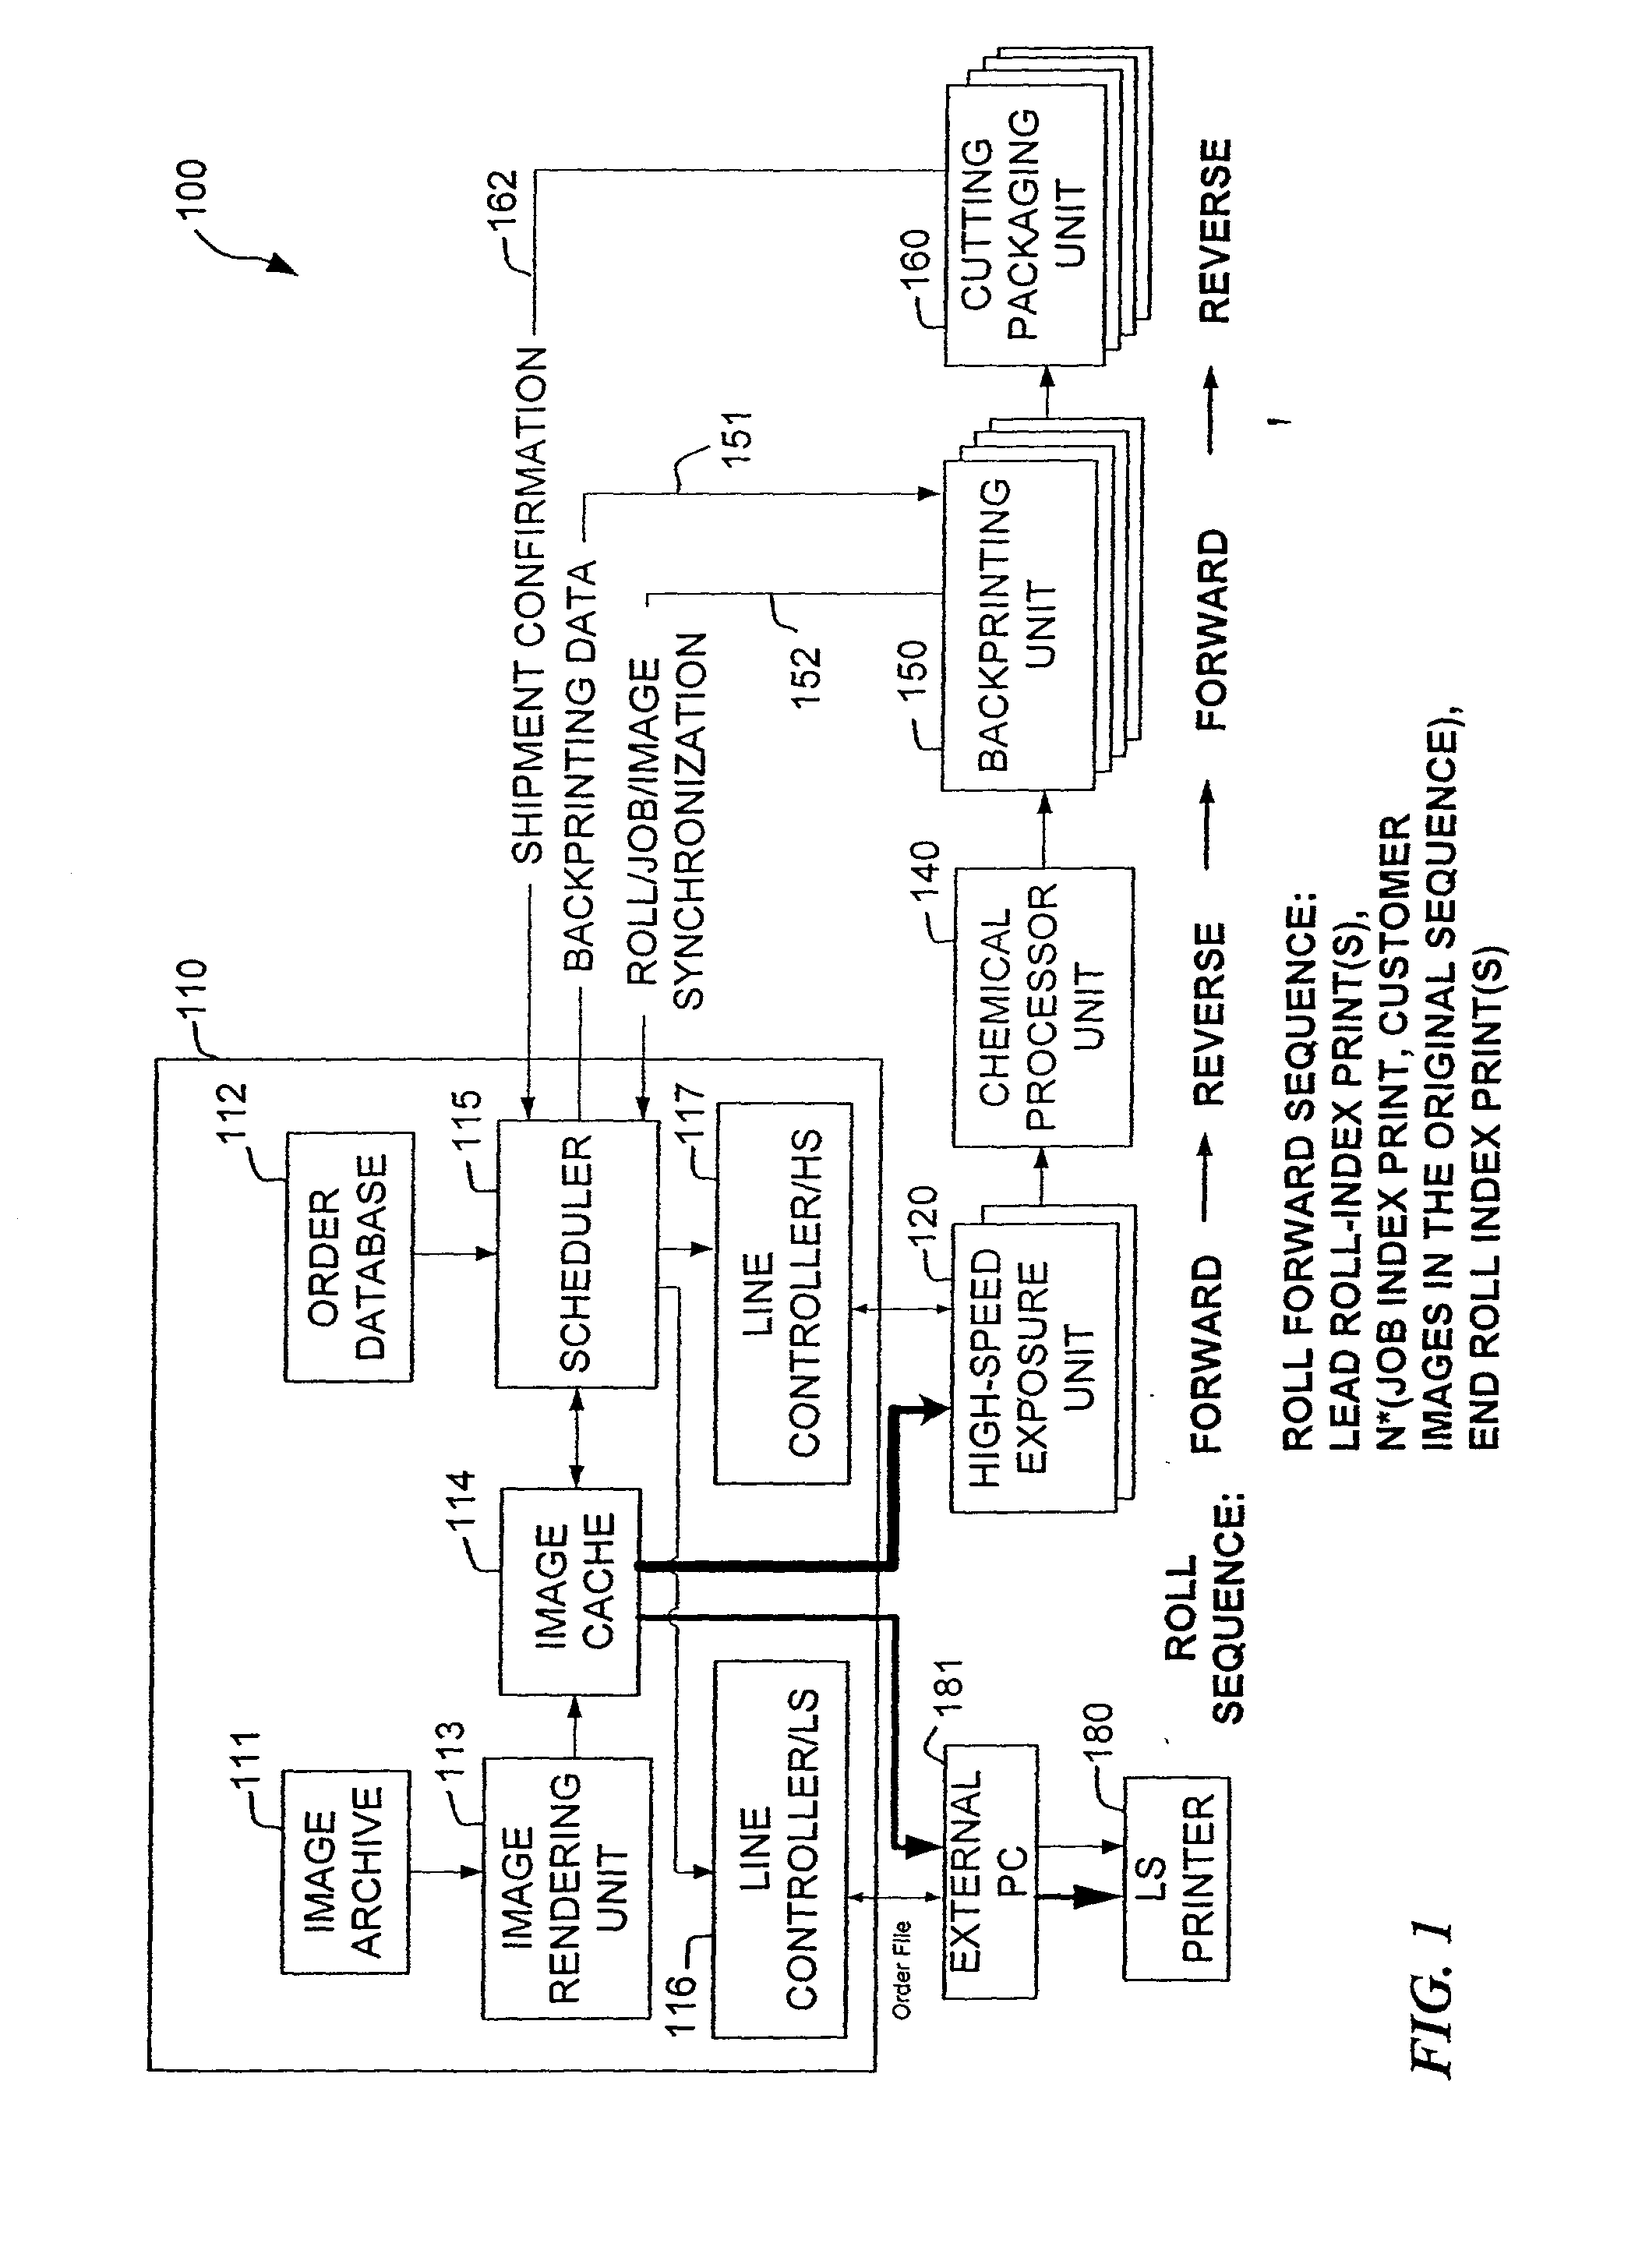 Apparatus, architecture and method for high-speed printing